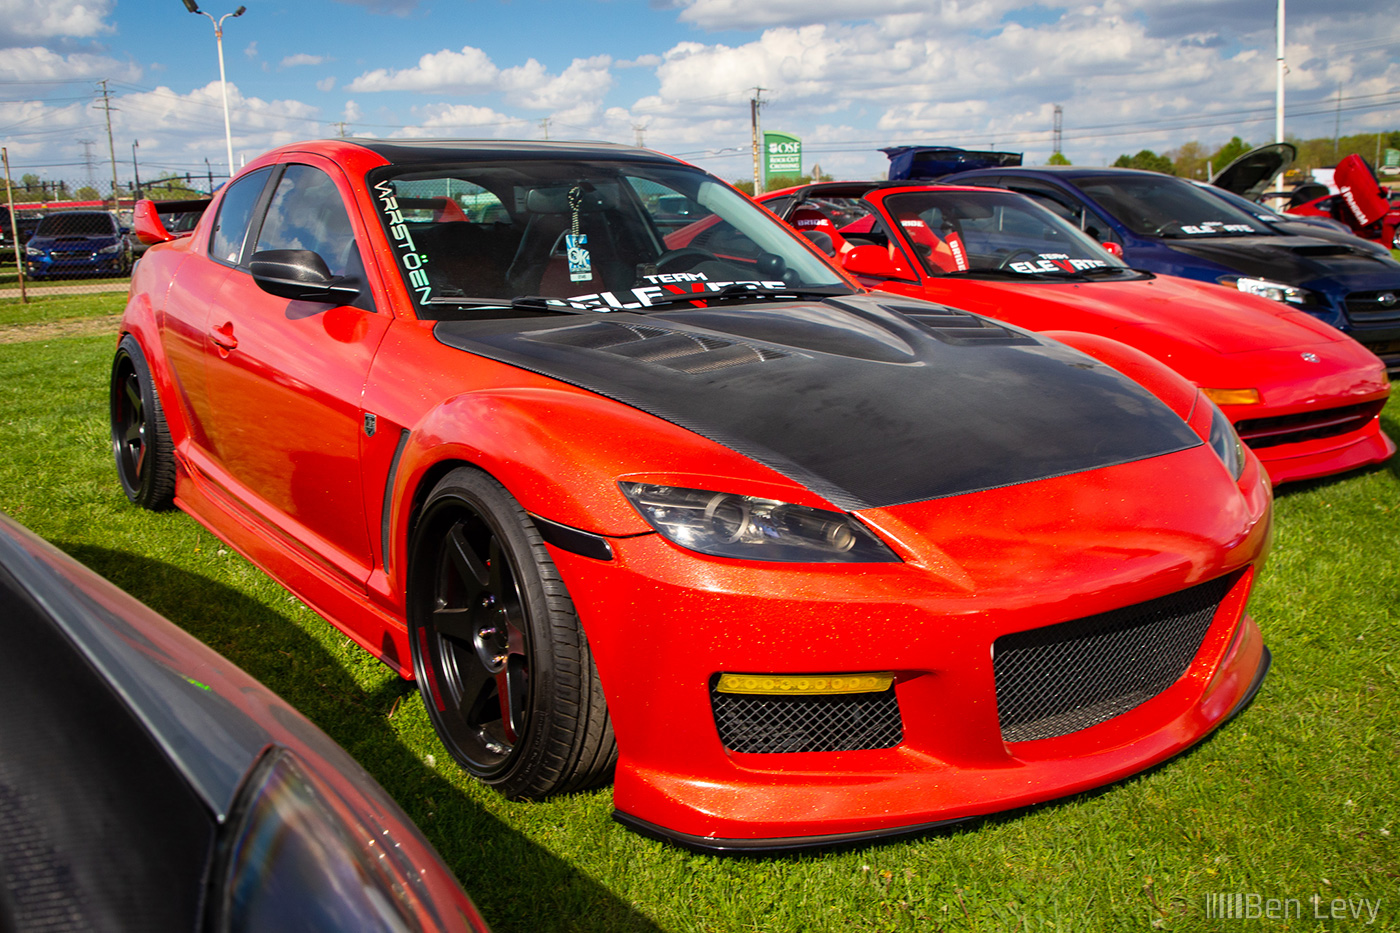 Red Mazda RX-8 with Team Elevate